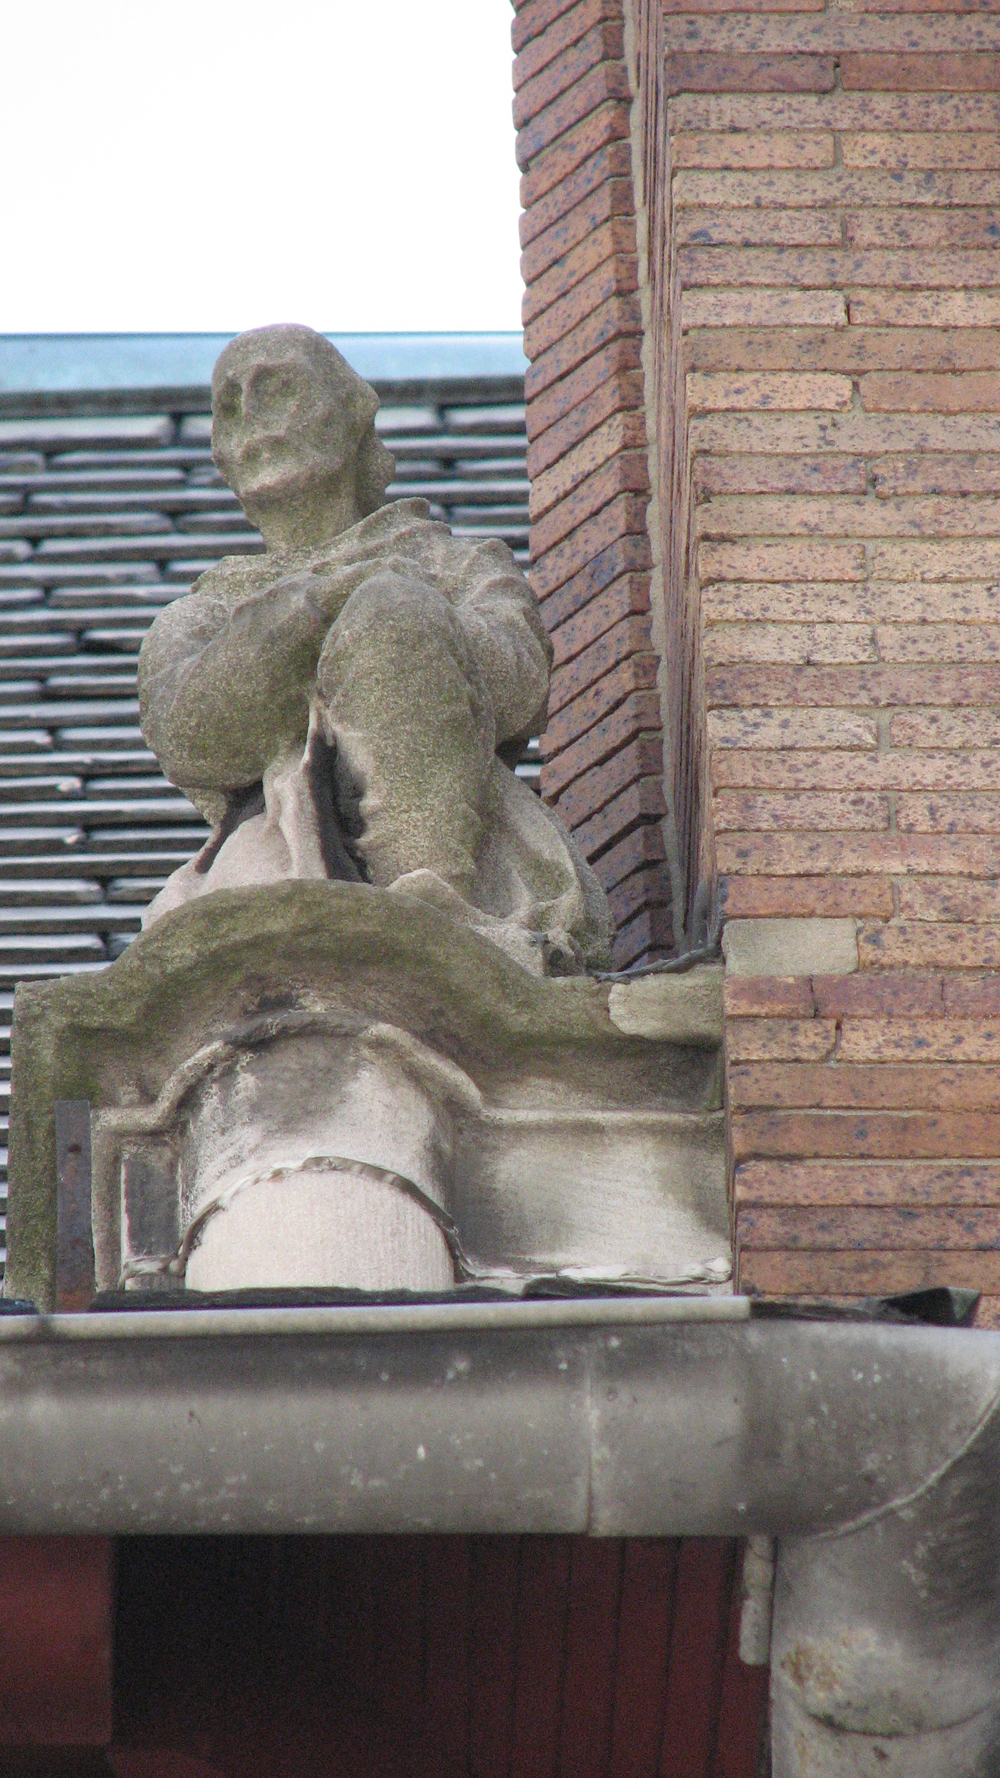 The figure of a man kneels on the slate roof.